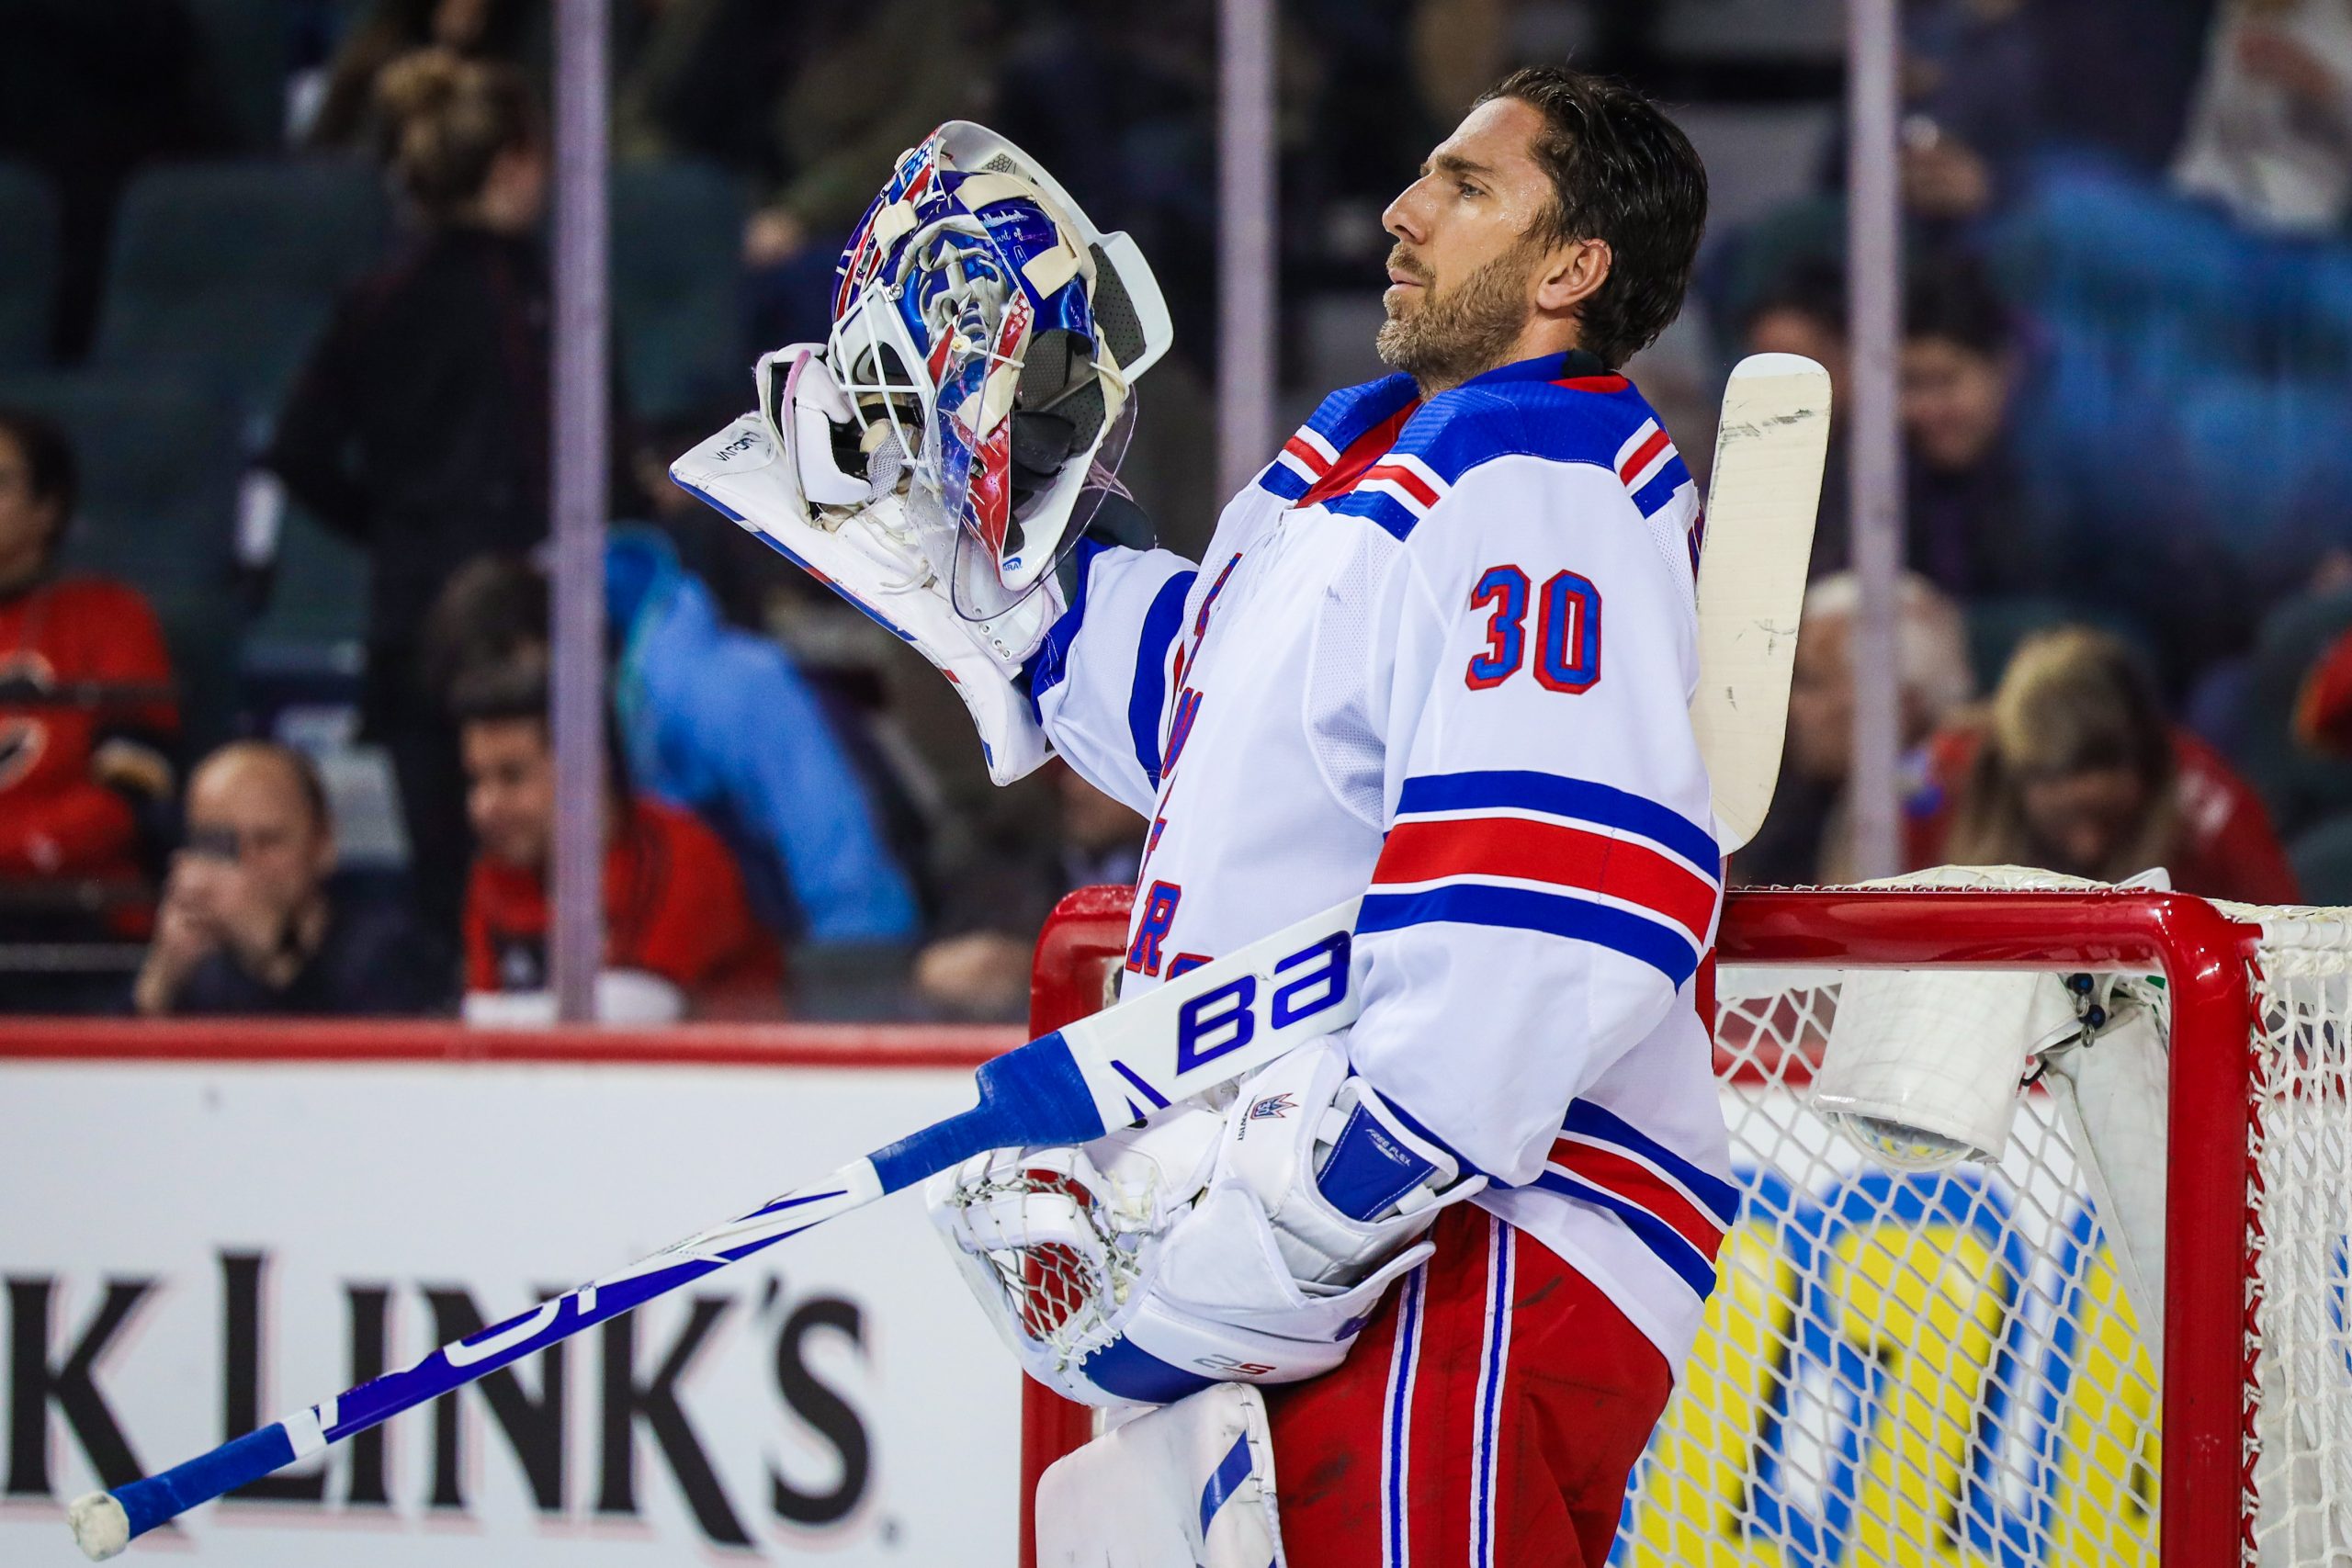 how long has henrik lundqvist been in the nhl